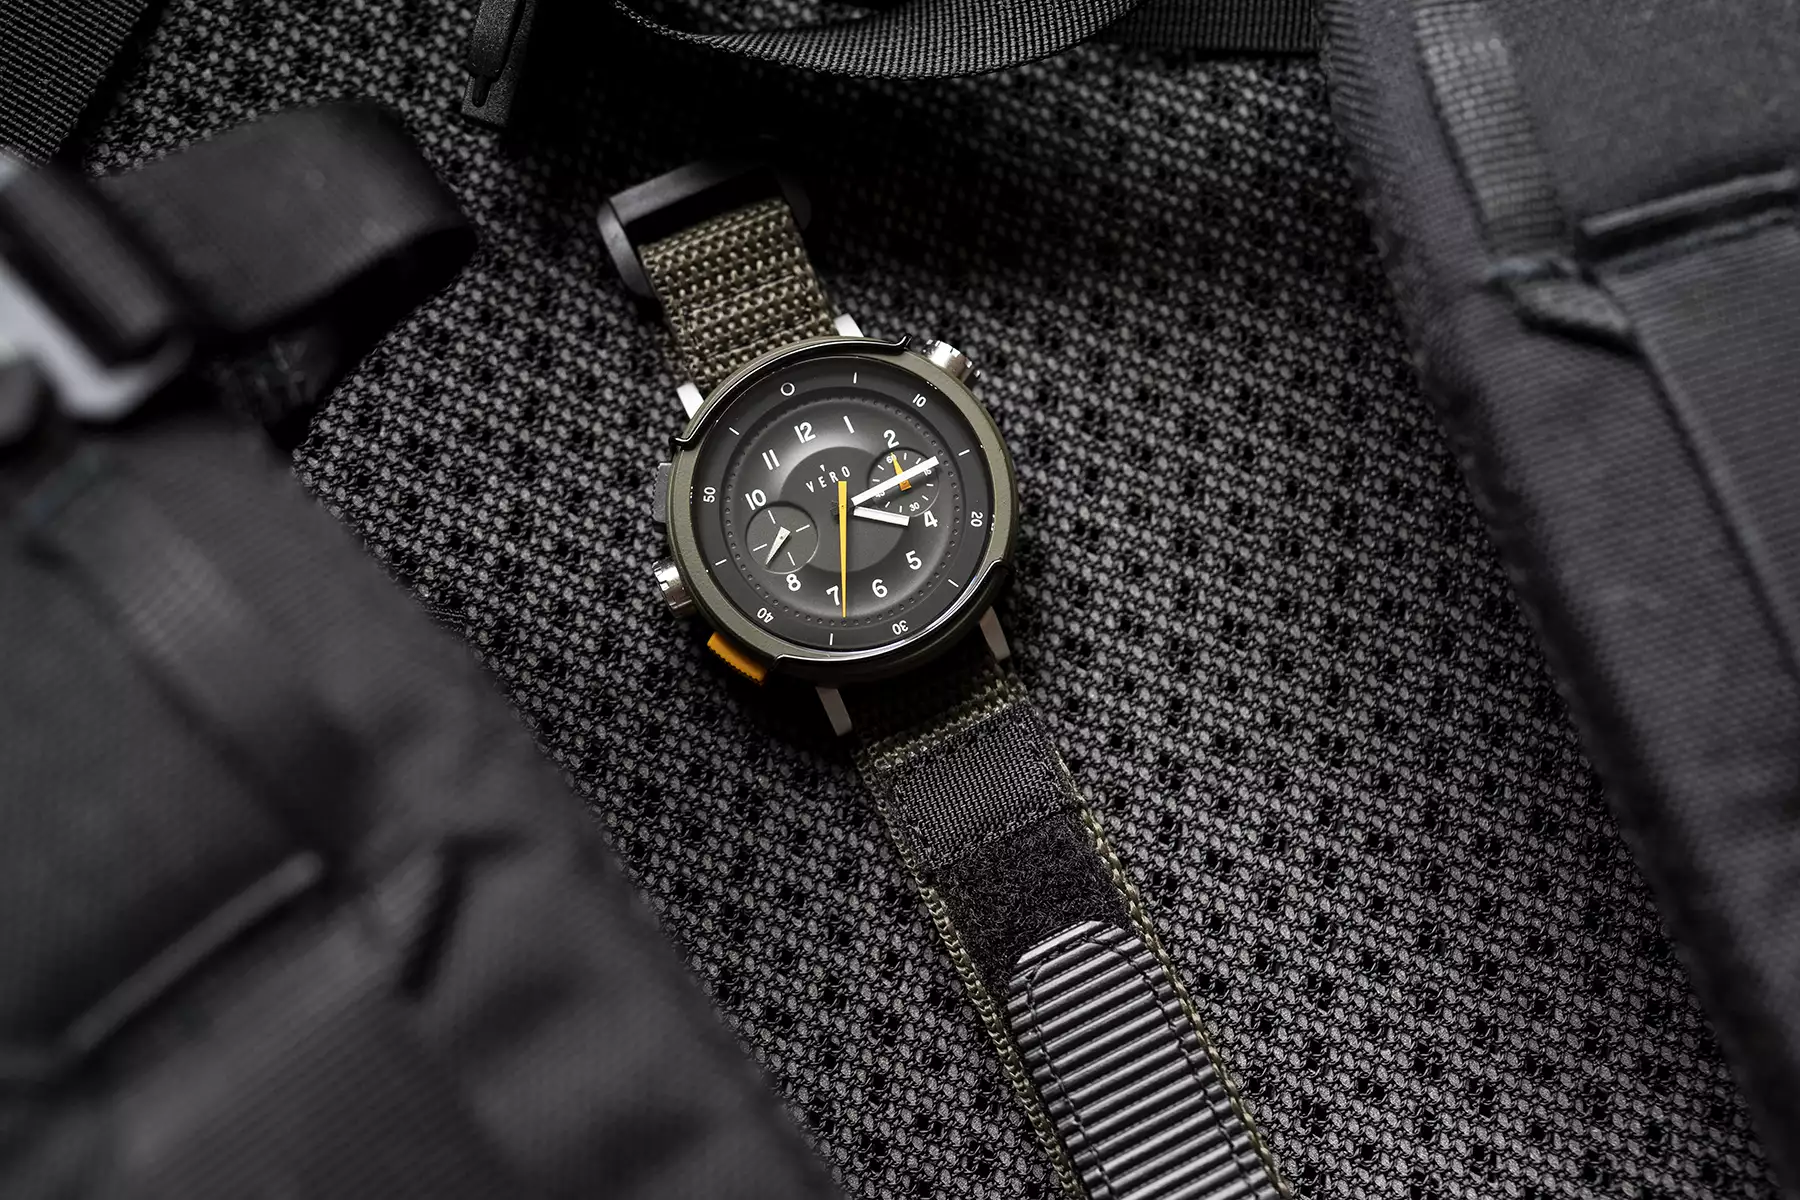 Hands-On With The Unexpected Vero Workhorse Chrono